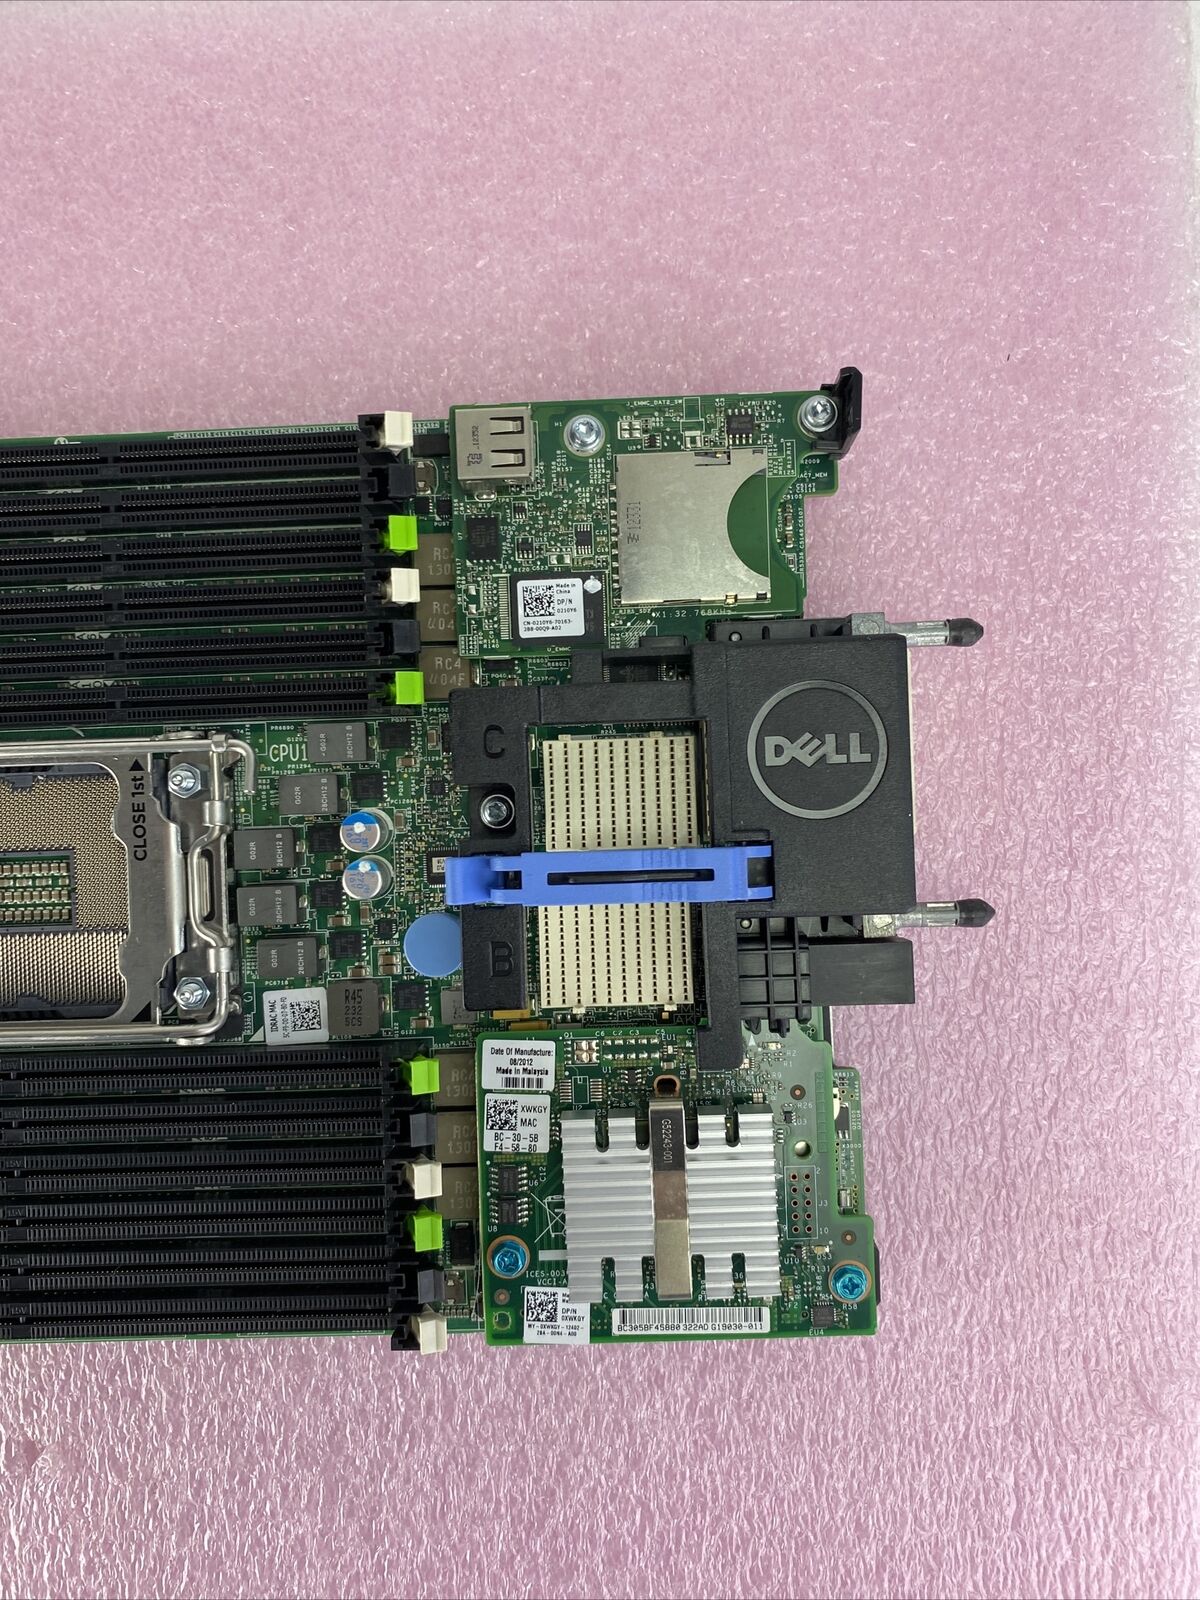 Dell 0VHRN7 System Board Motherboard for Poweredge M620 Blade